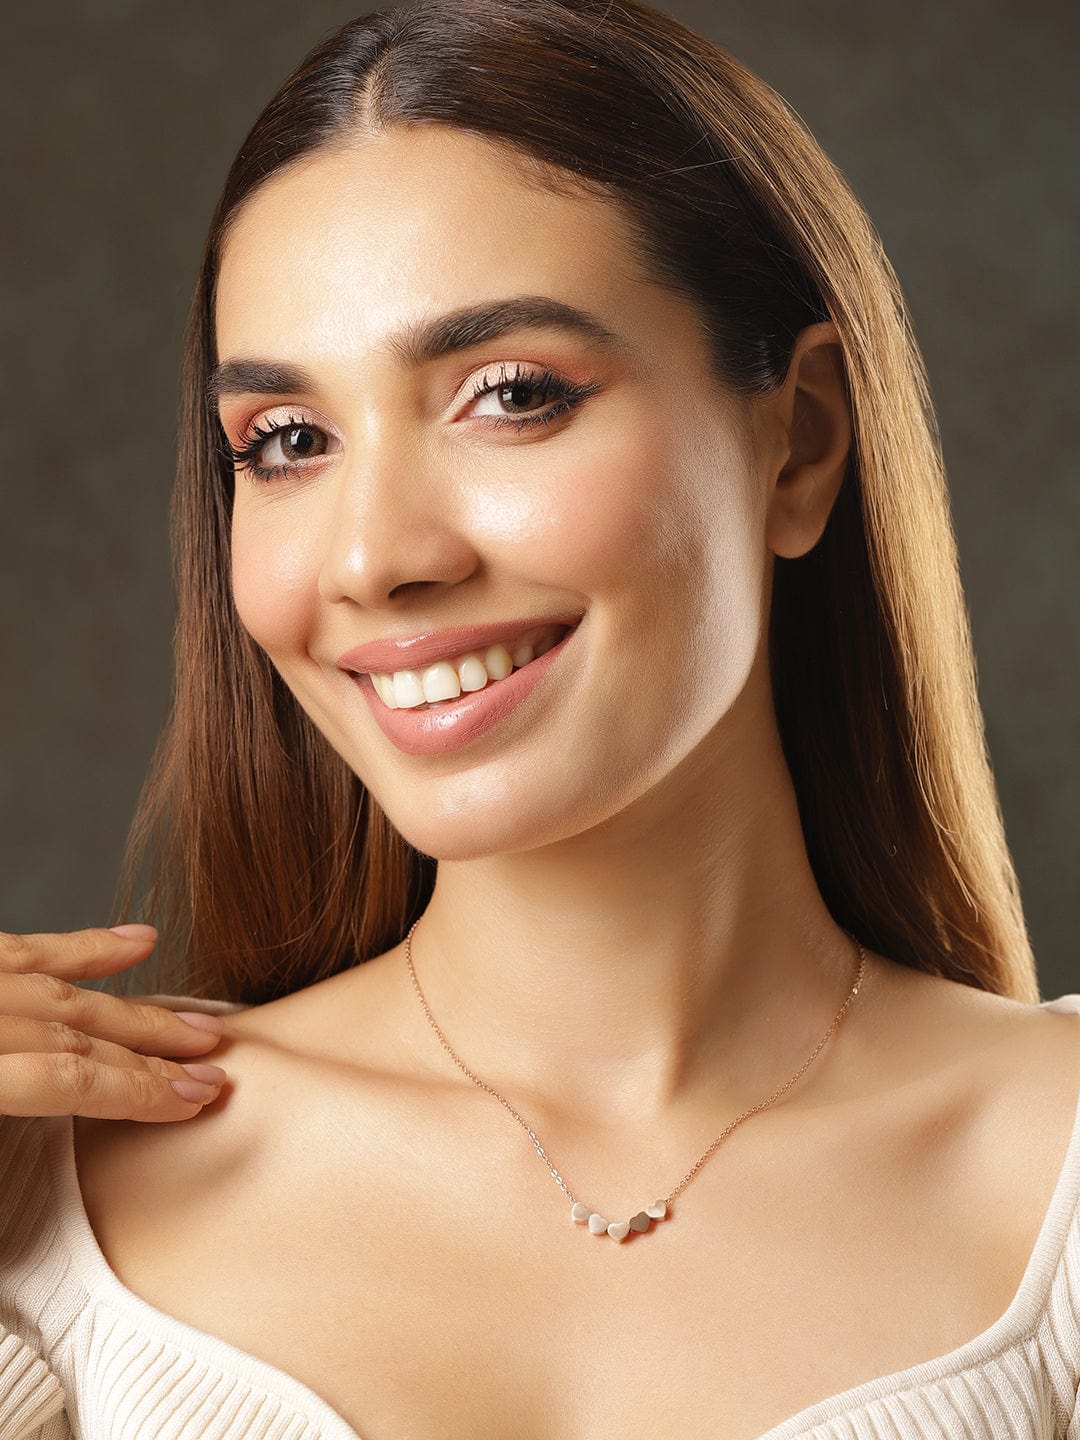 Rubans Voguish Rose Gold Plated Heart Shaped Charm Necklace Necklace and Chains